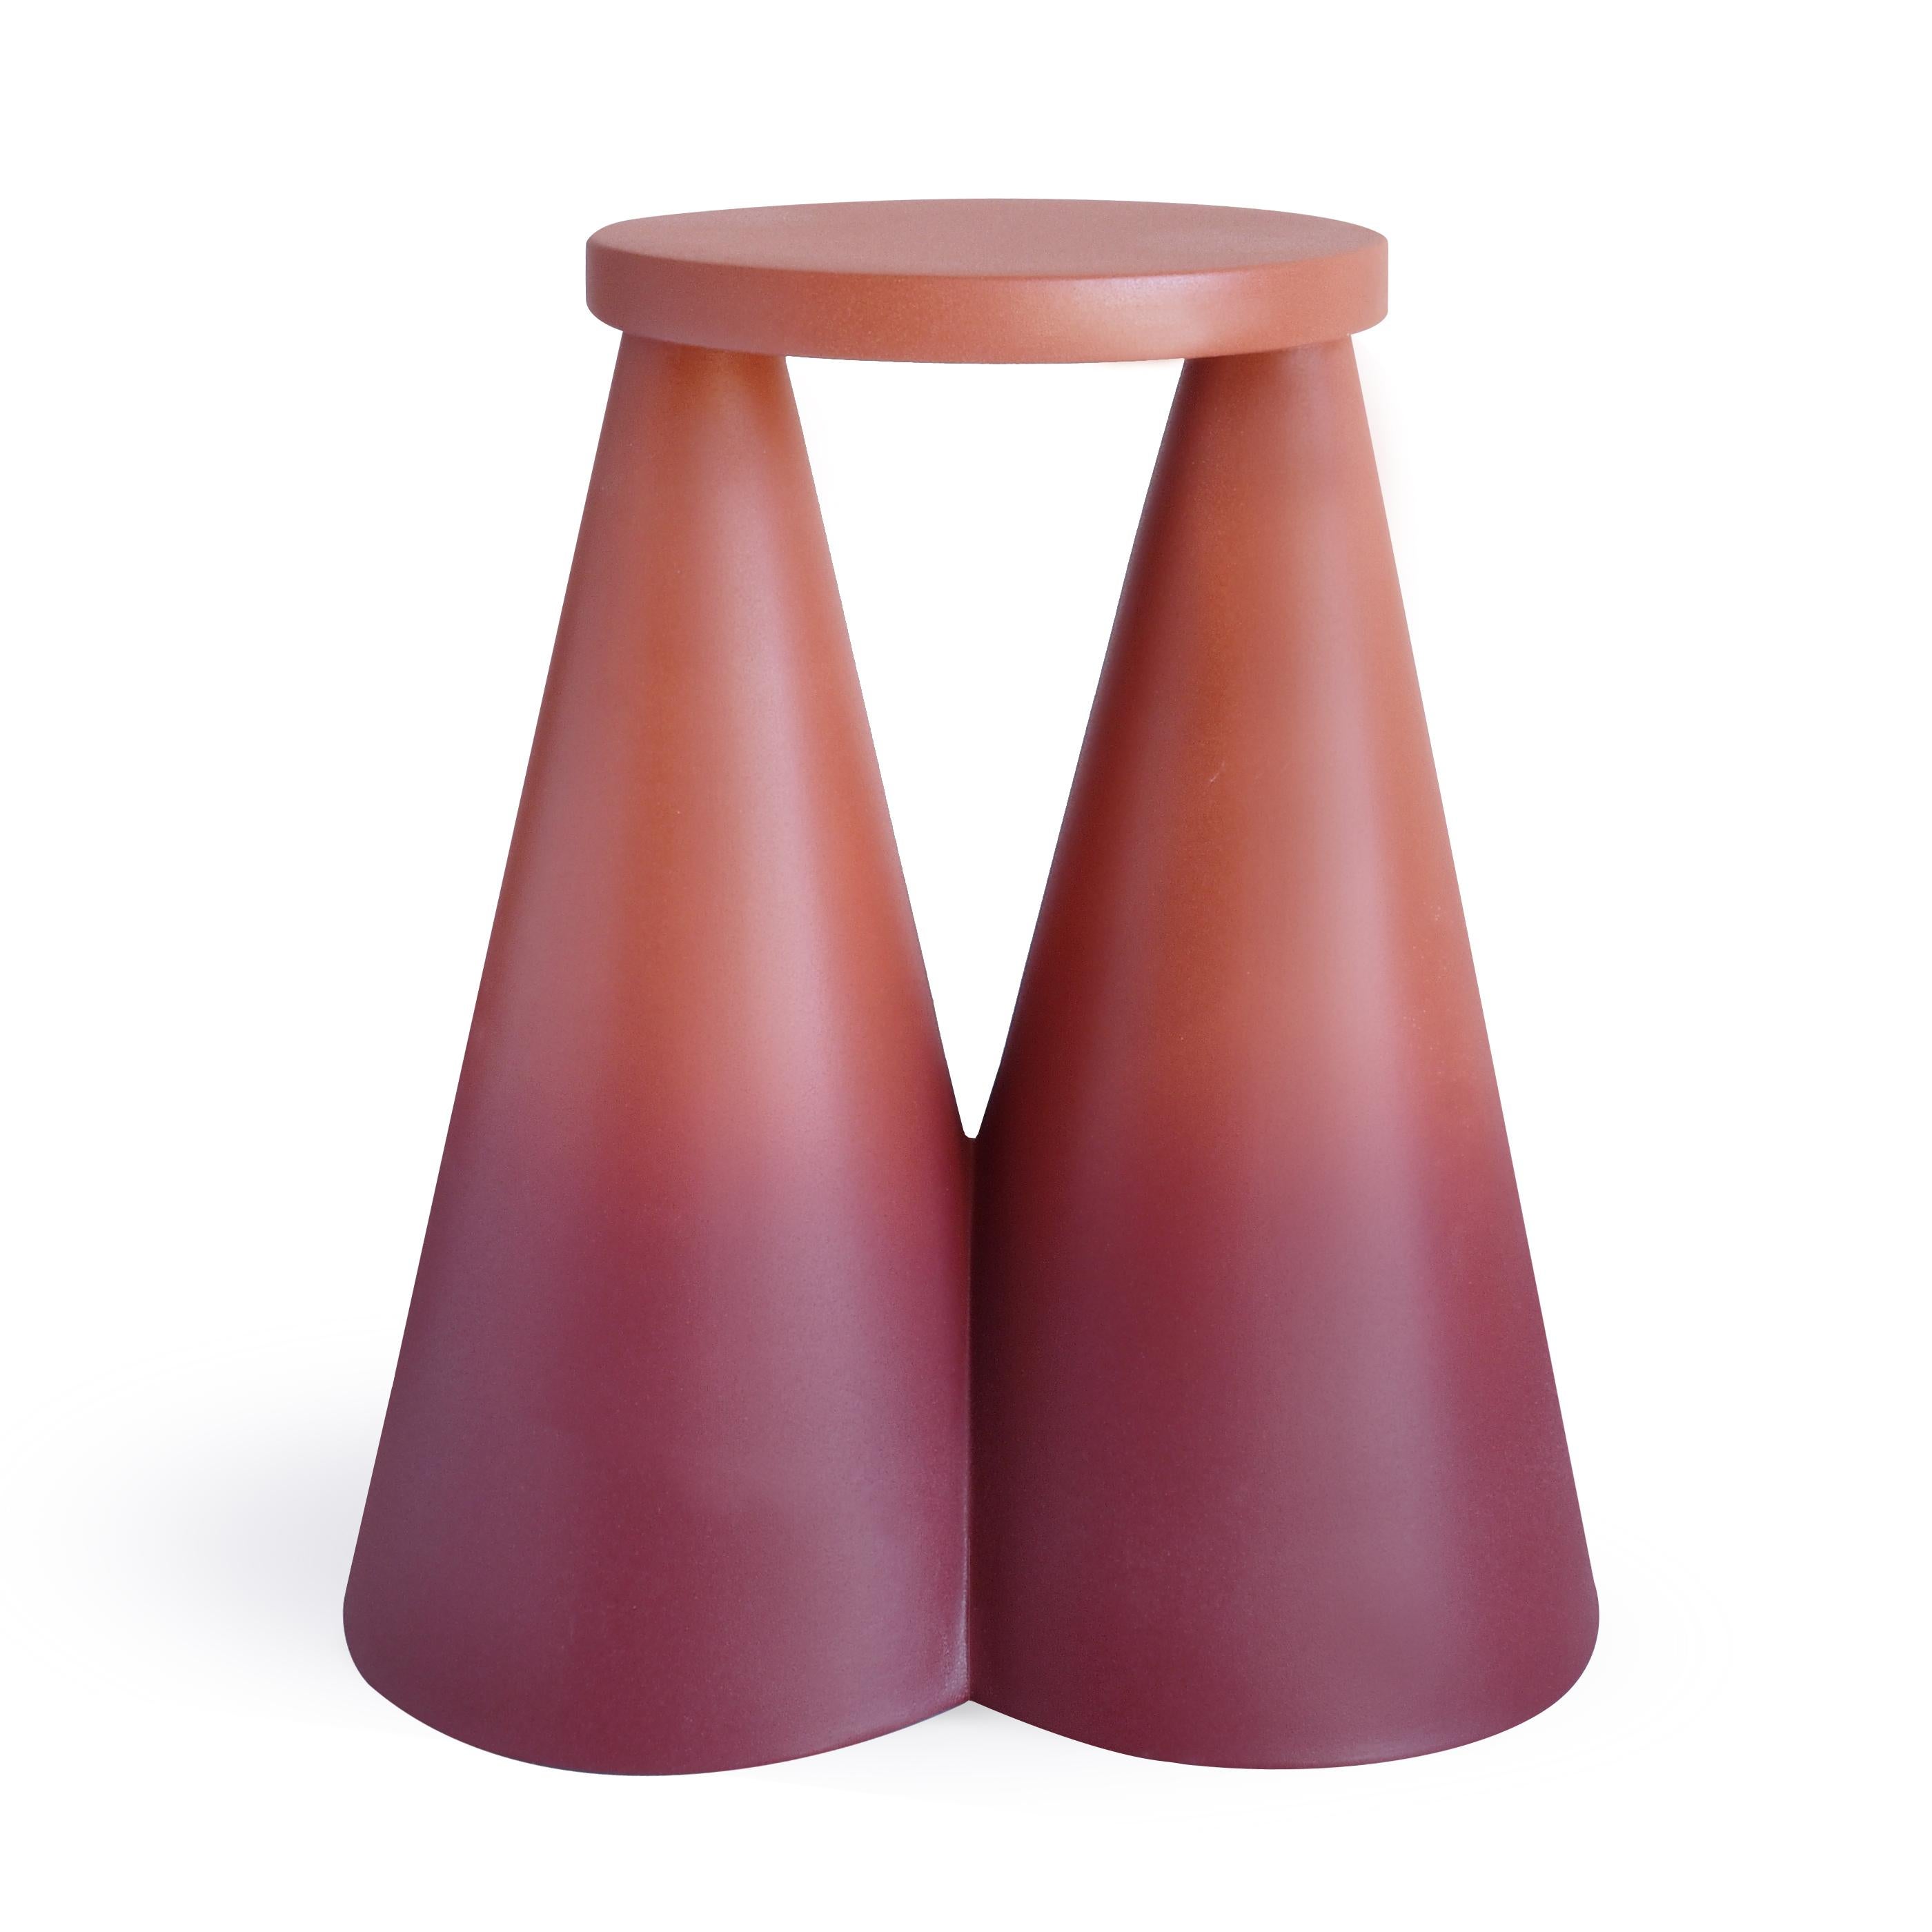 Isola/ Ceramic Conic Side Table/ Cotto, Designed by Cara/Davide for Portego For Sale